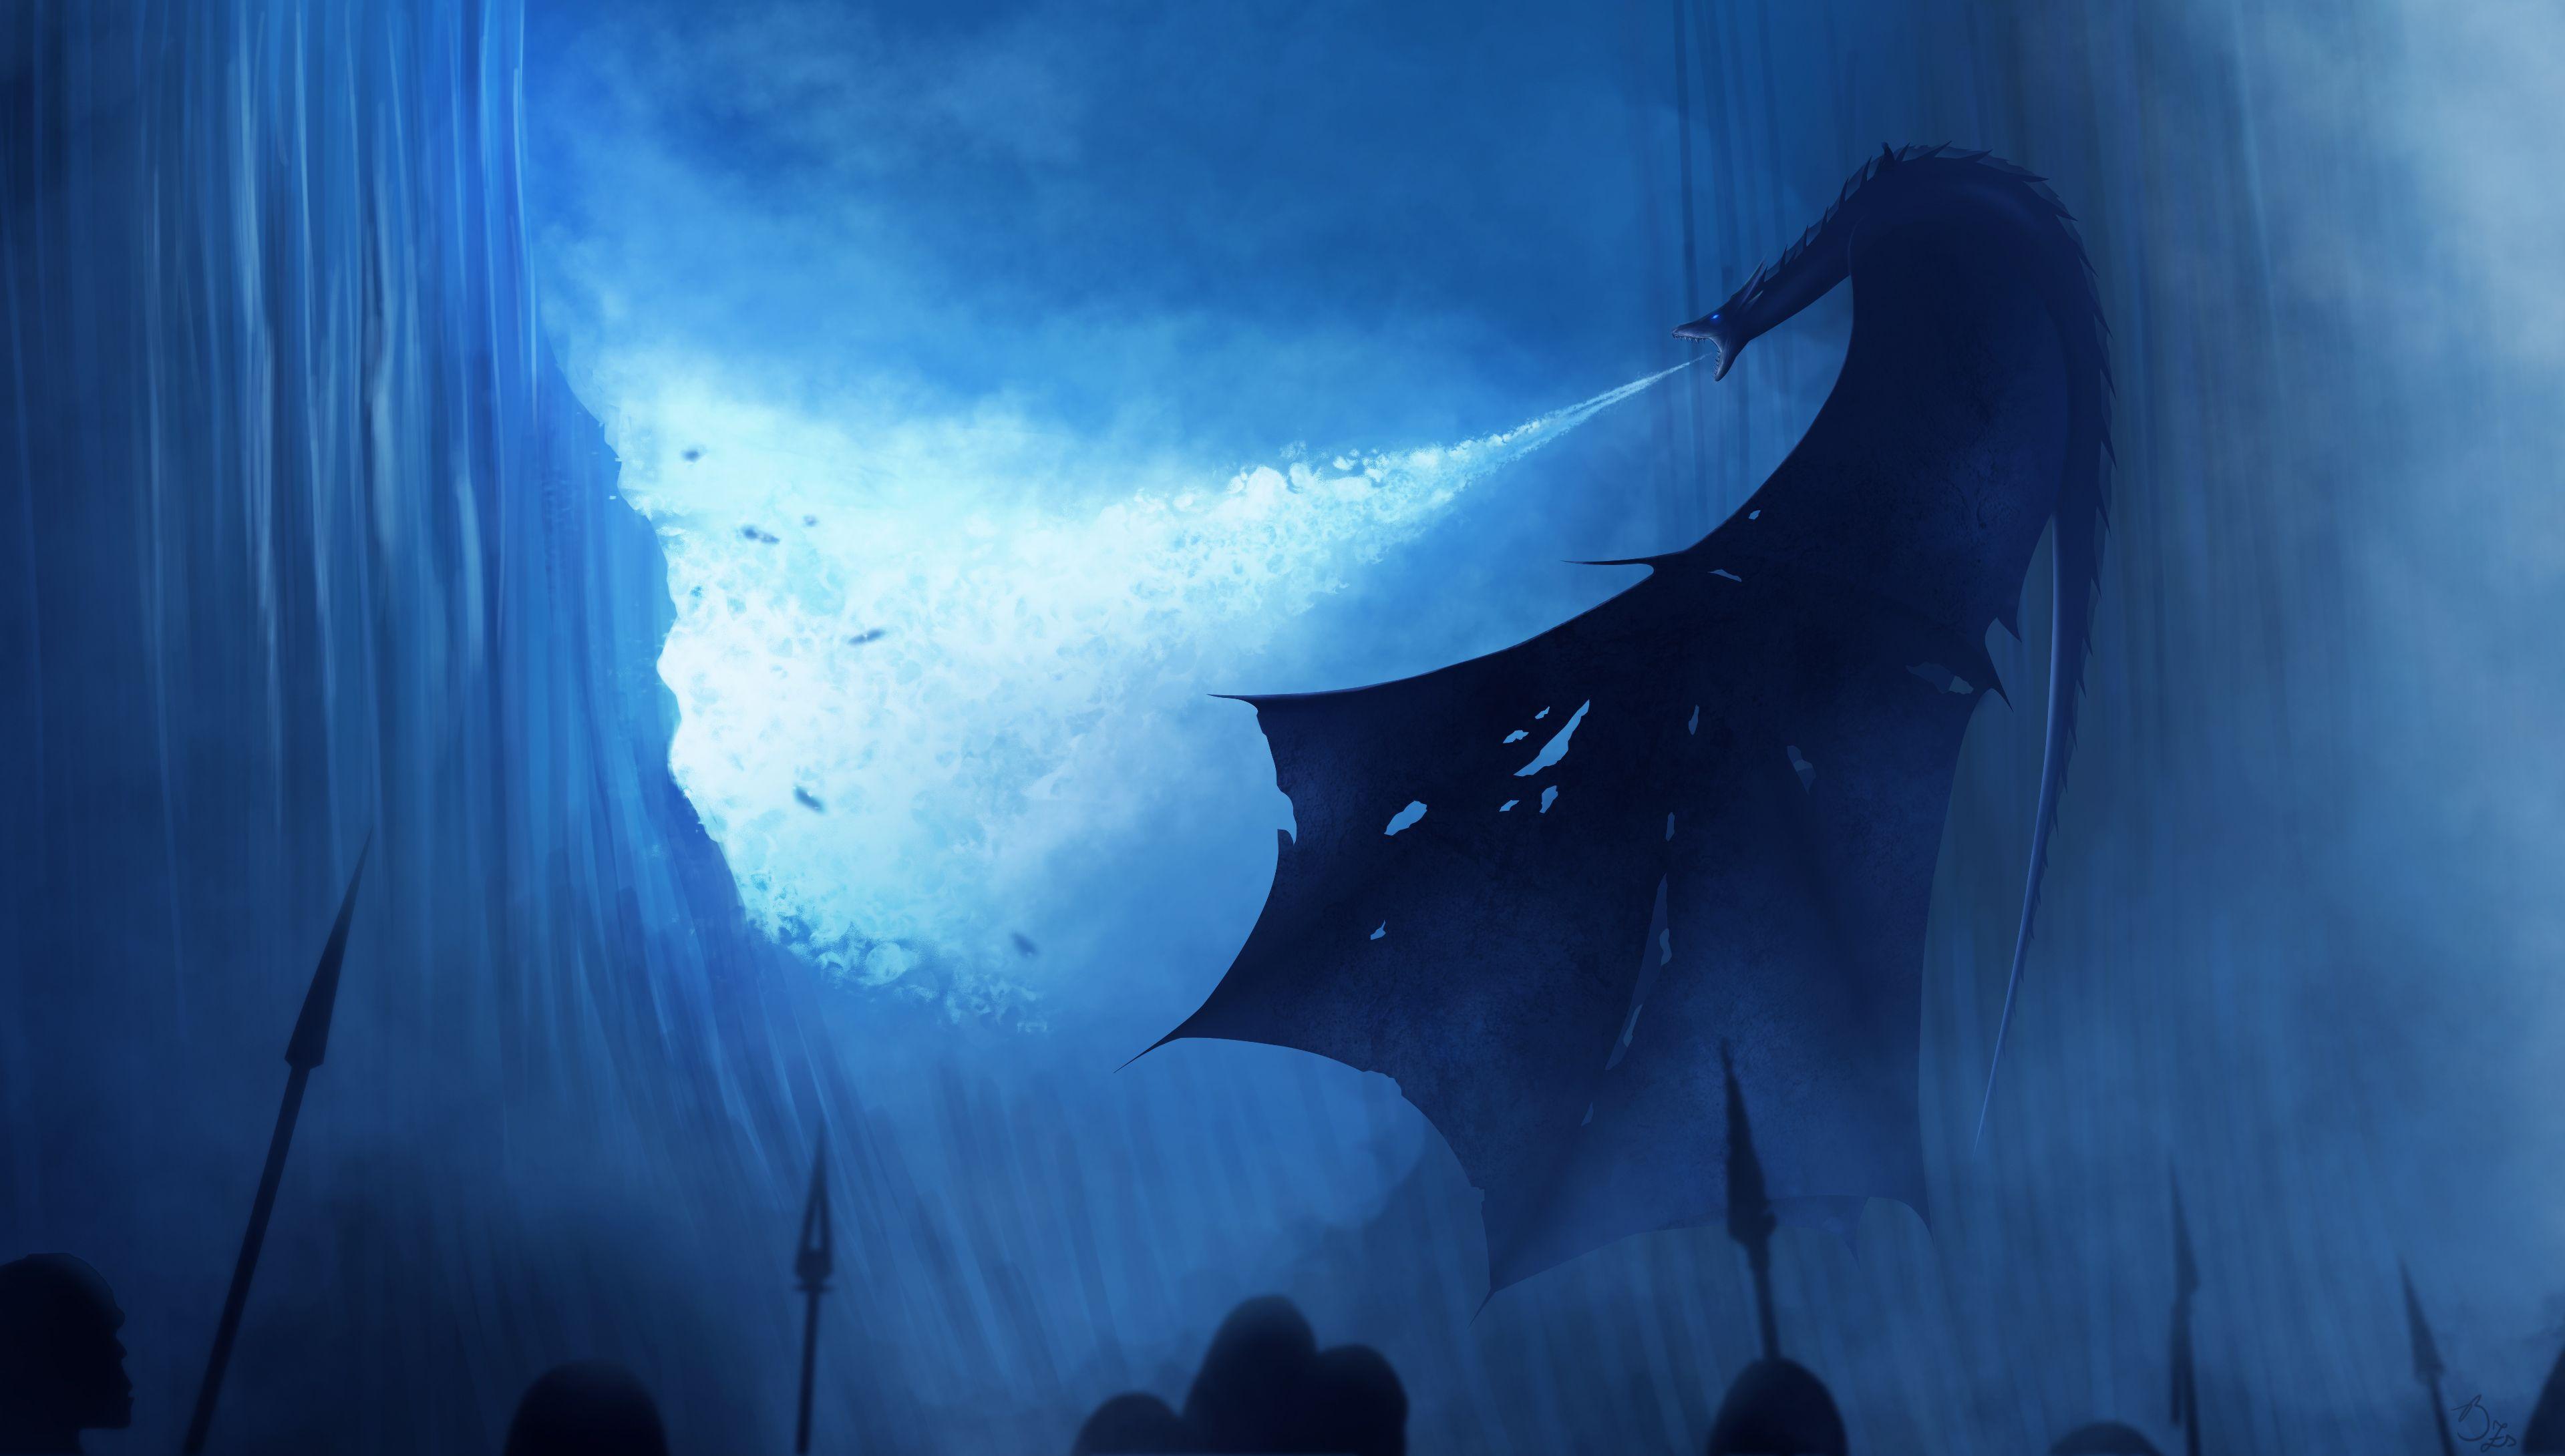 Viserion (Game Of Thrones) [3840x2180]. Ice dragon